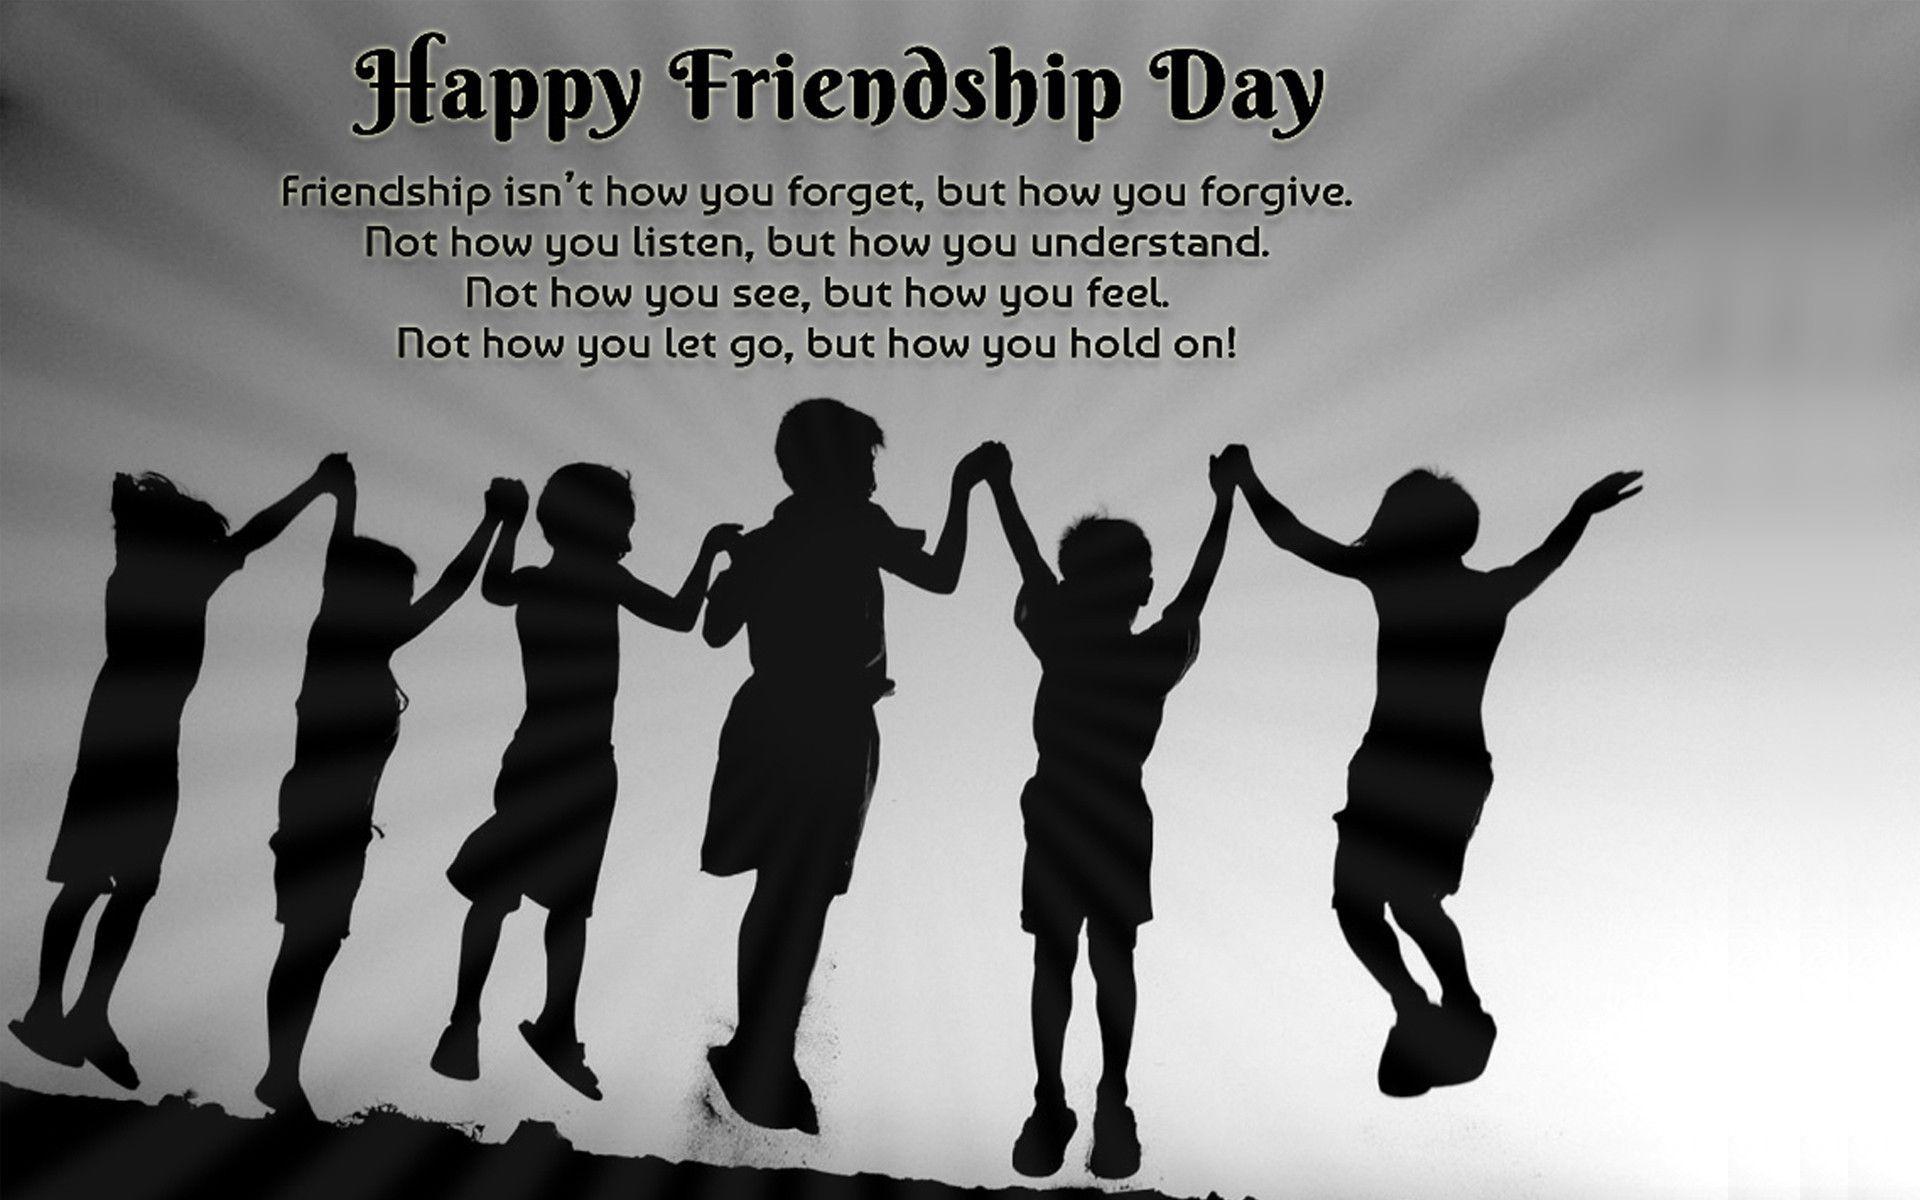 Friendship Quotes Wallpapers Free Download  Friendship Wallpapers With  Quotes Free Download i  Friendship day wallpaper Friendship images Friendship  day images